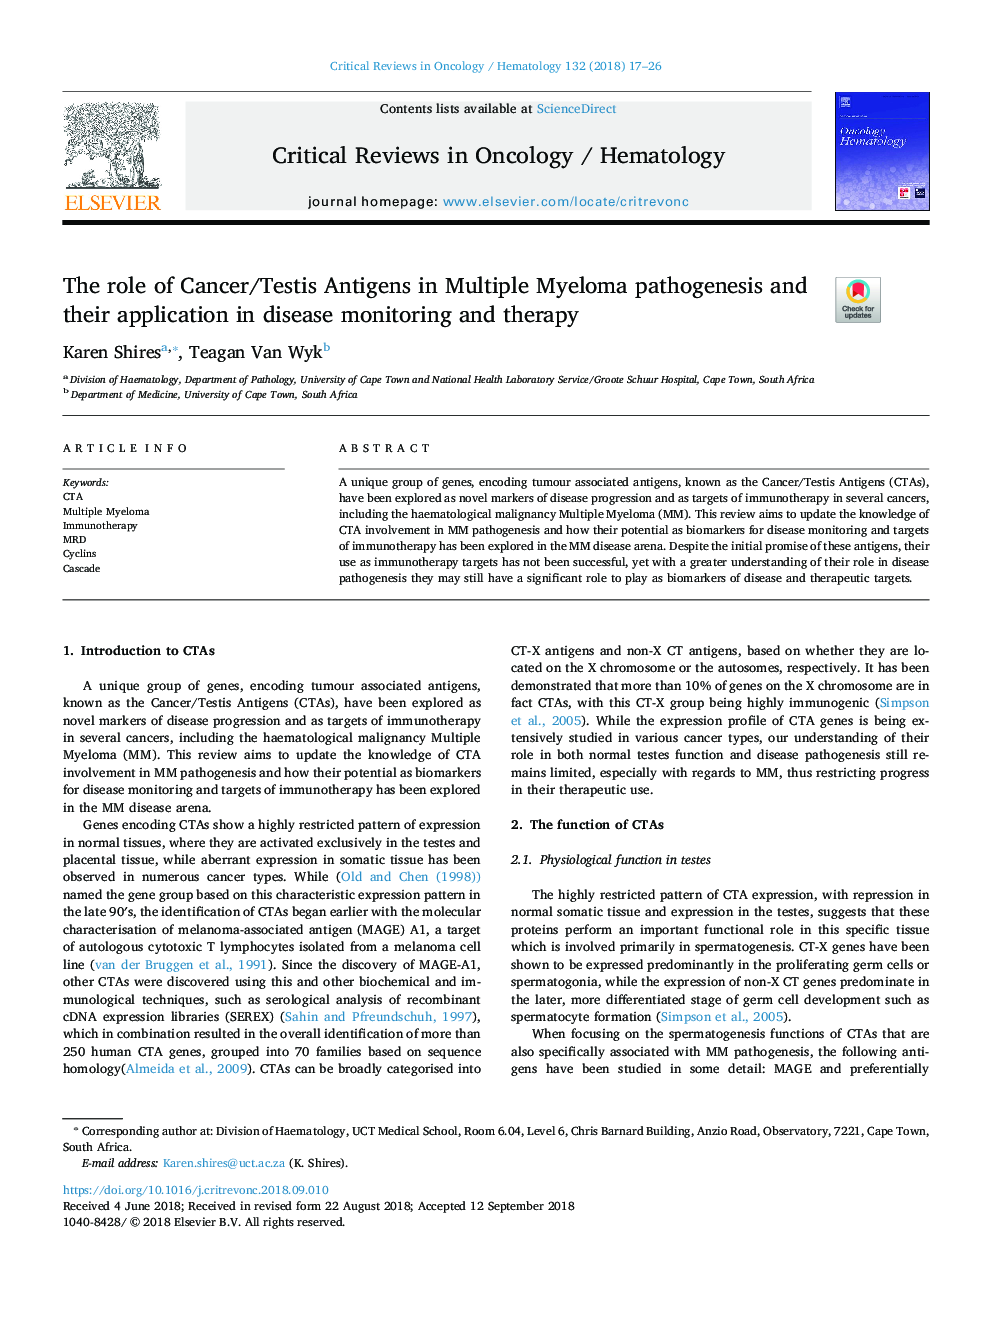 The role of Cancer/Testis Antigens in Multiple Myeloma pathogenesis and their application in disease monitoring and therapy